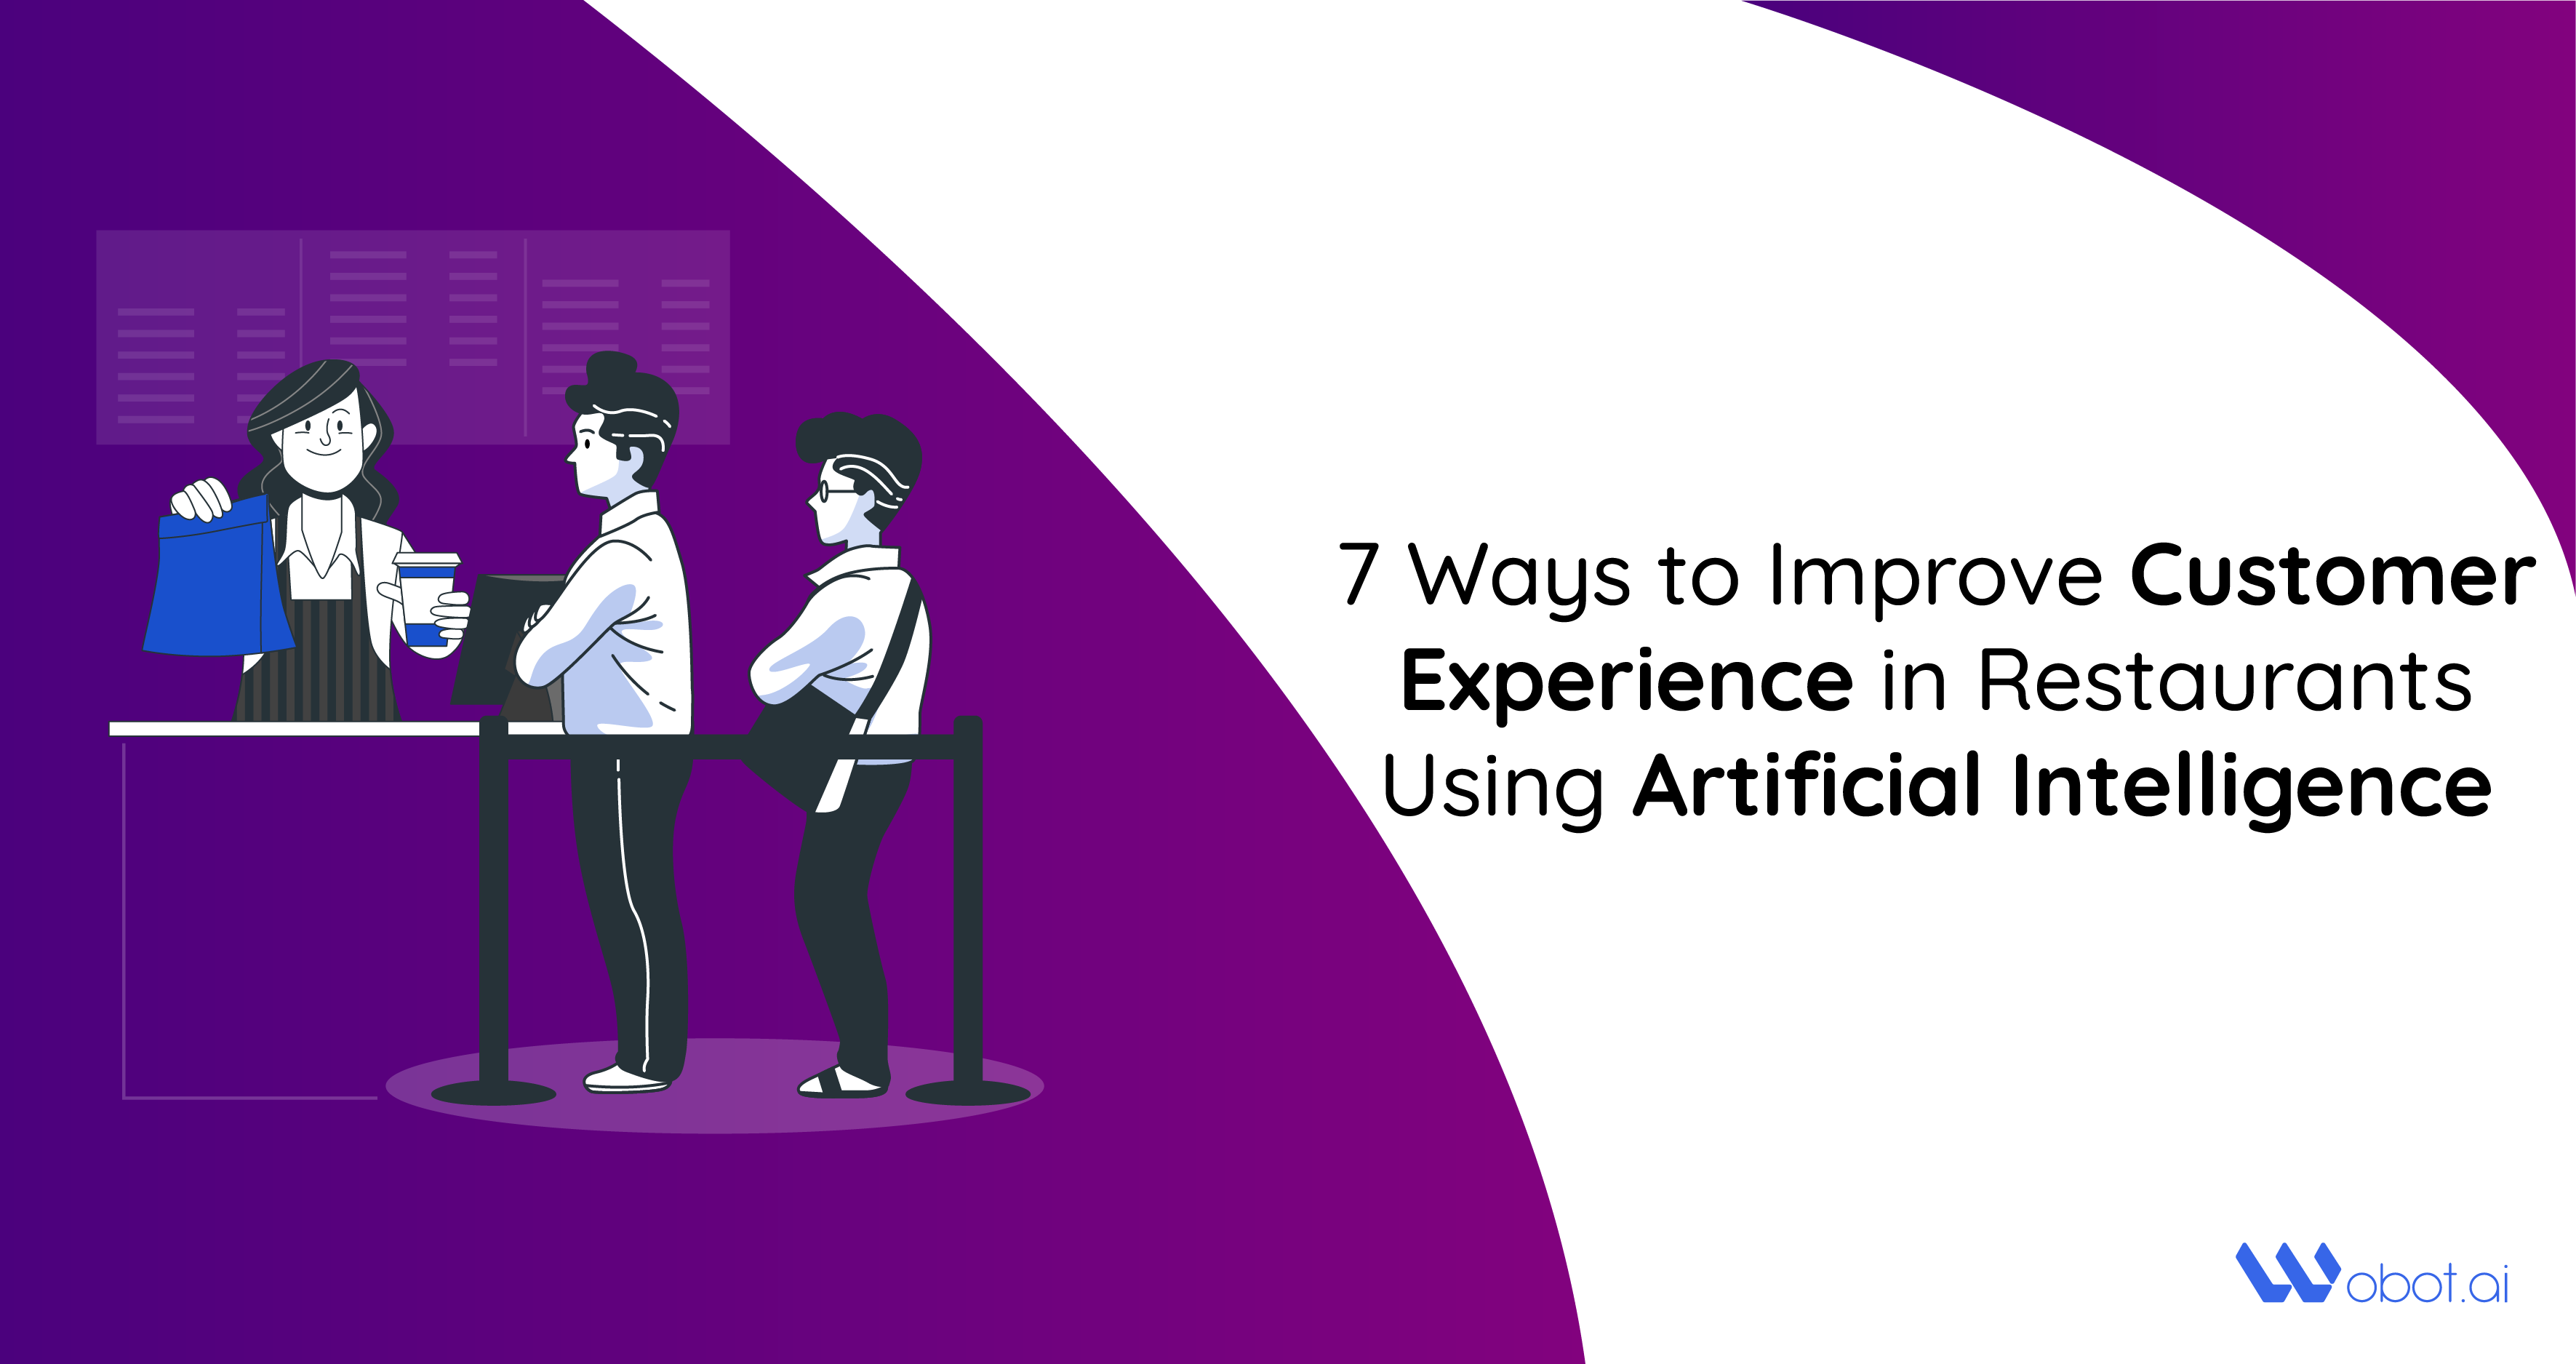 7 Ways to Improve Customer Experience in Restaurants Using Artificial Intelligence